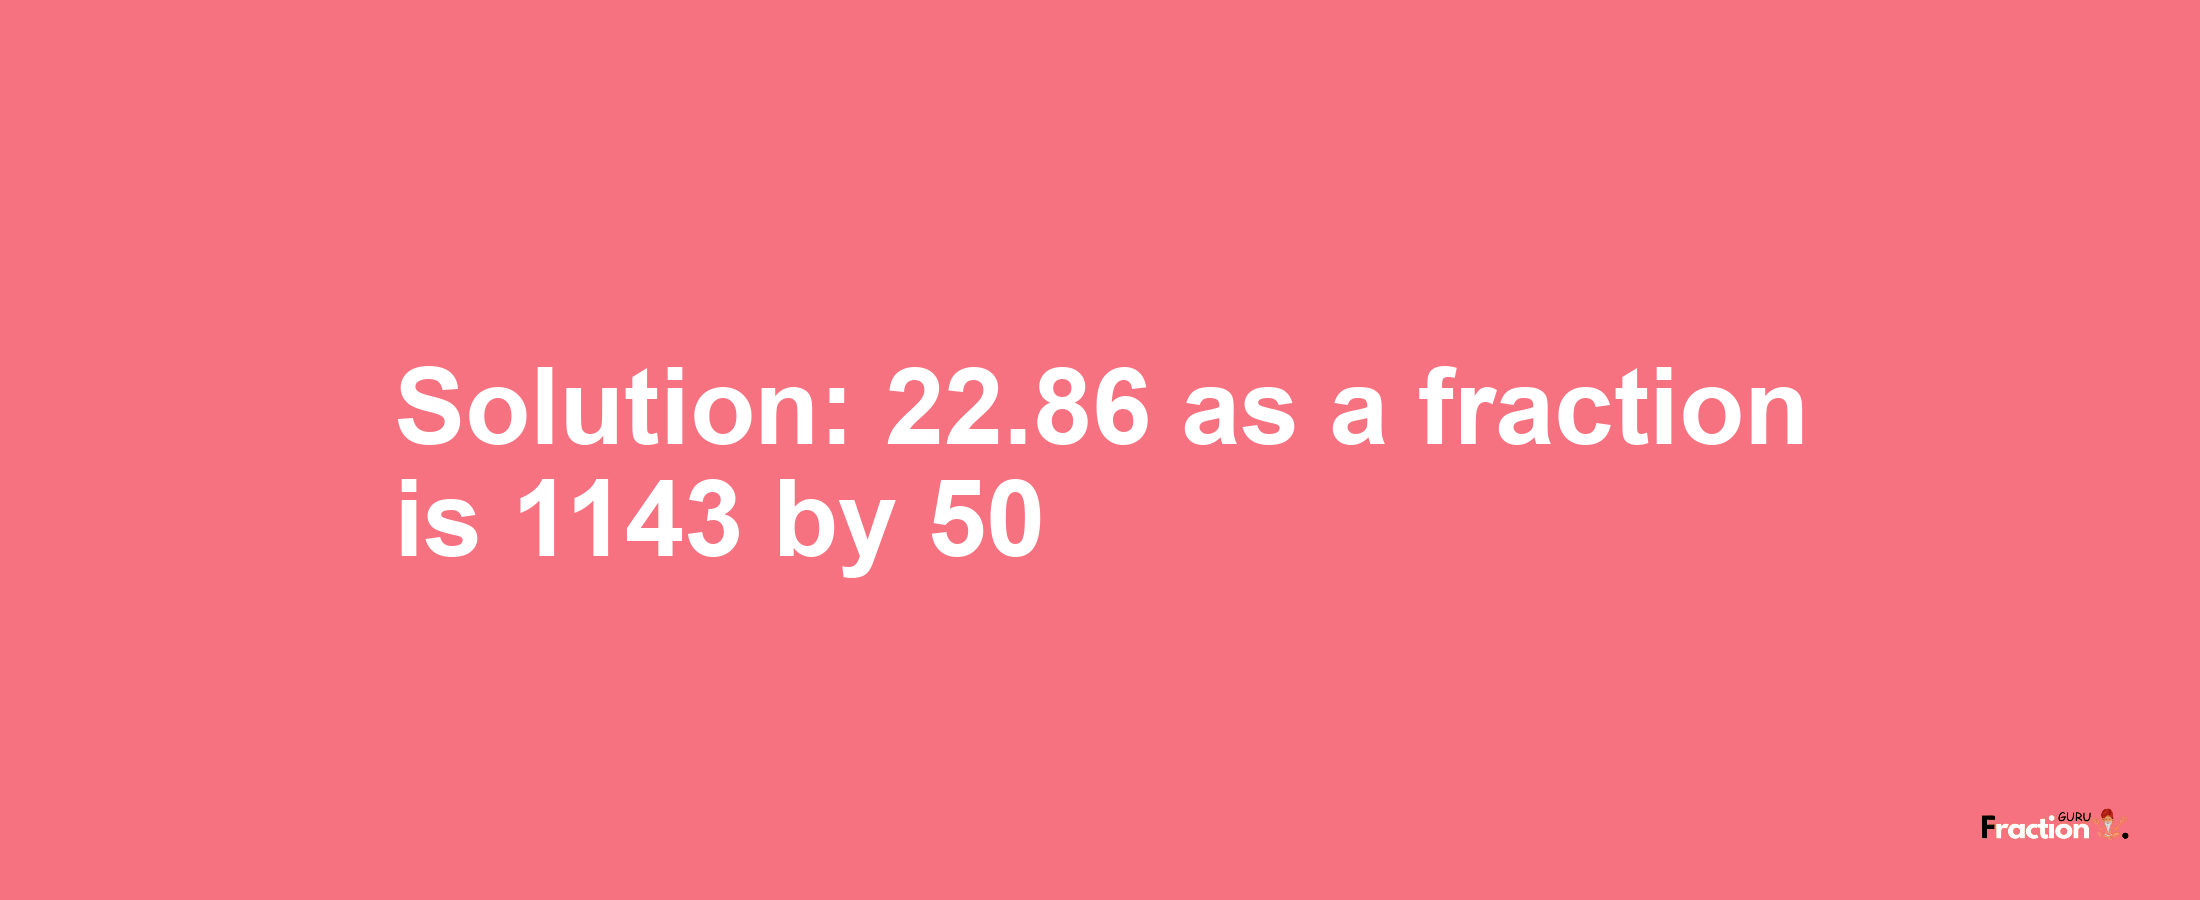 Solution:22.86 as a fraction is 1143/50